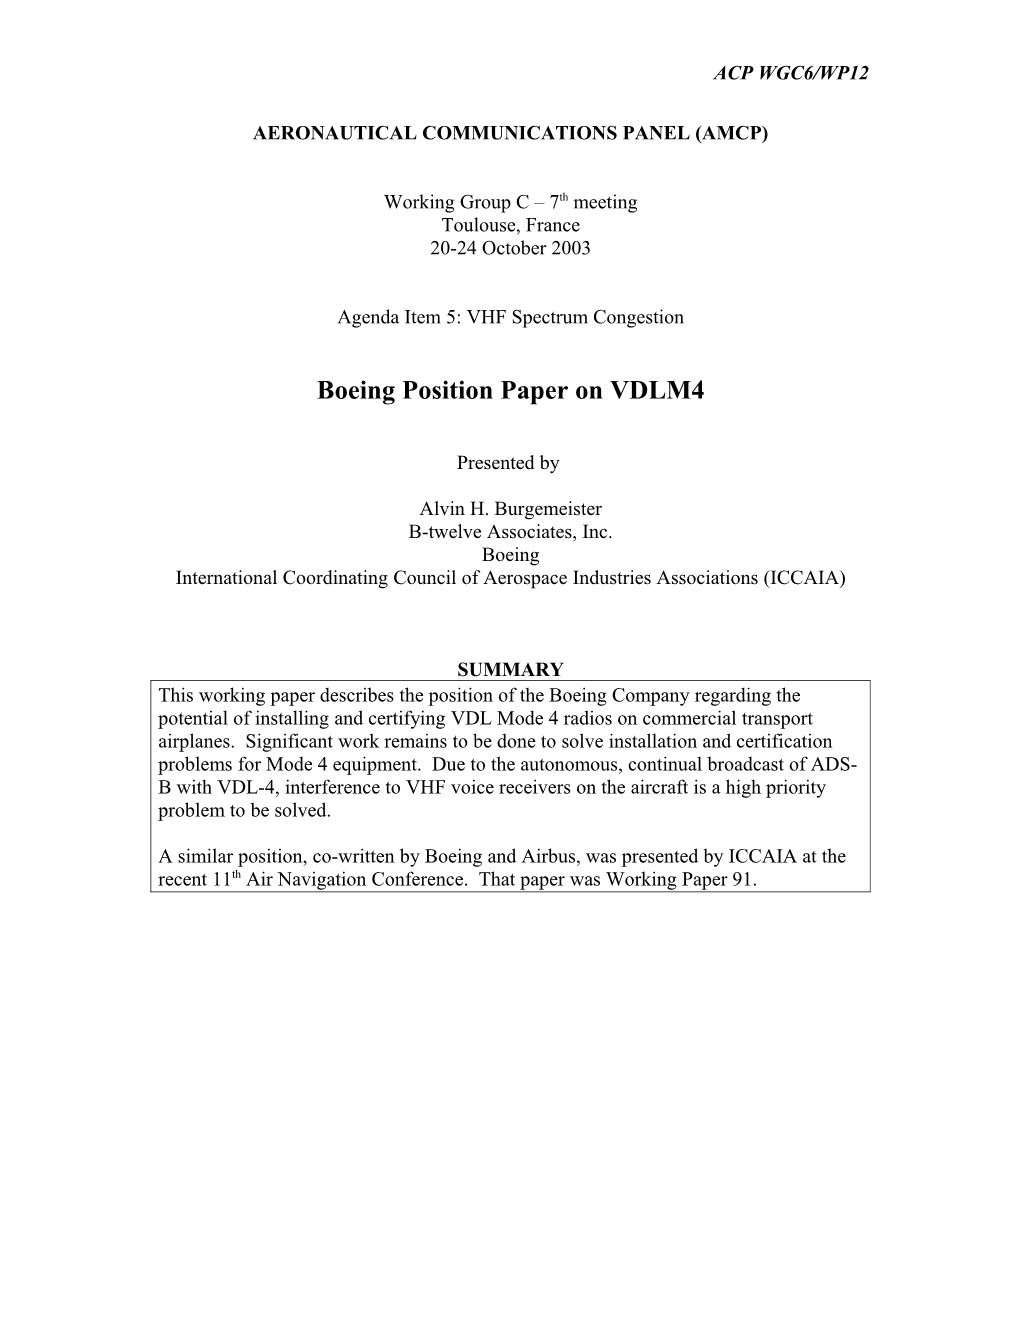 Boeing Position Paper on VDLM4